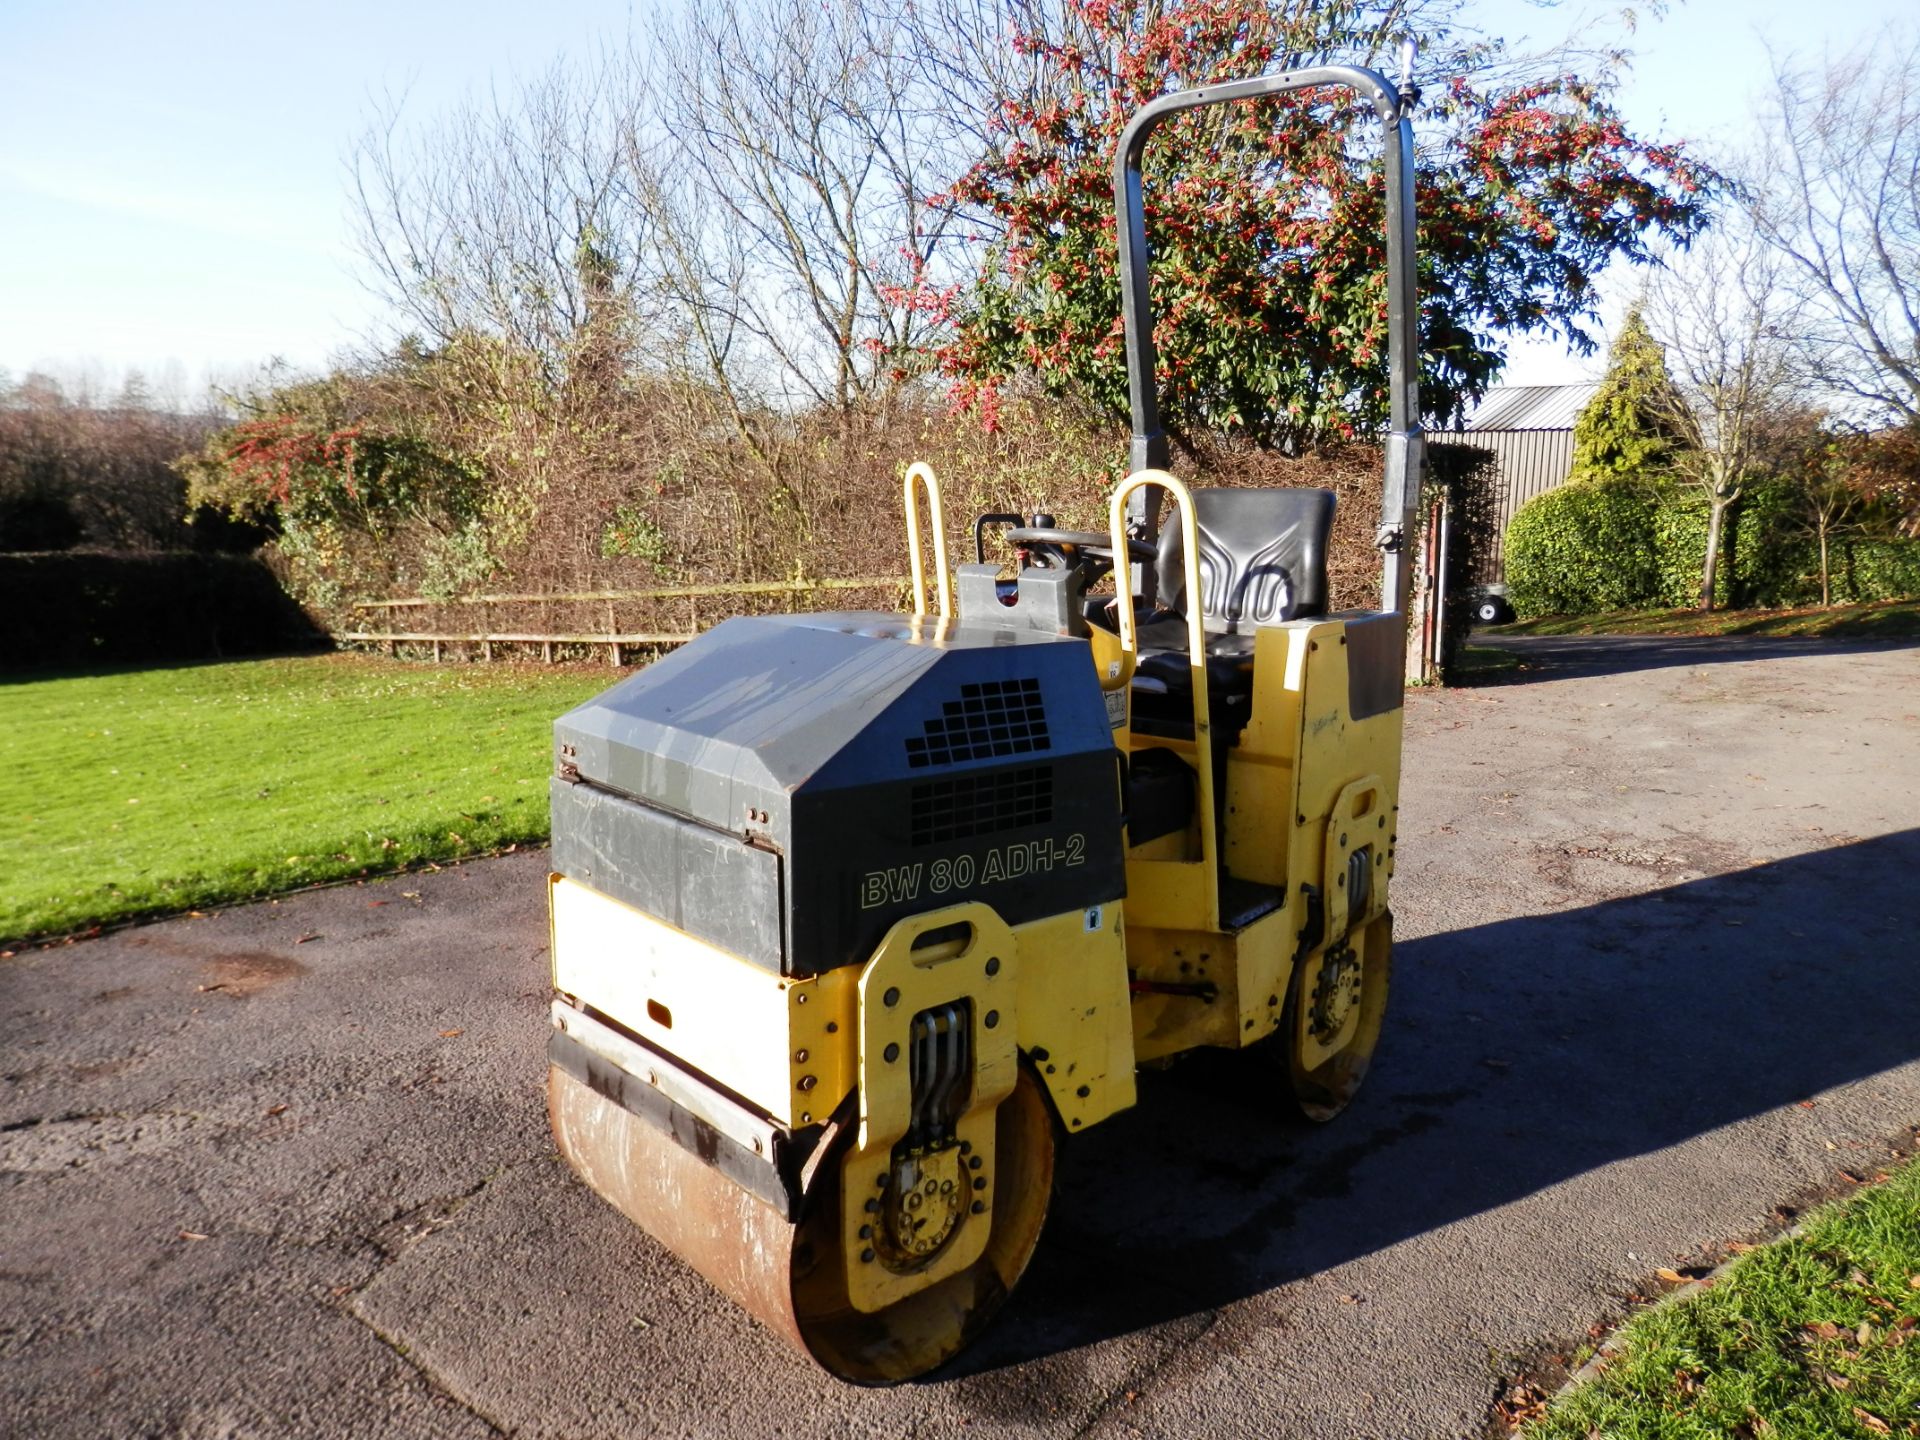 2007 ALL WORKING BOMAG ROLLER, MODEL BW80 ADH -2 - Image 11 of 12